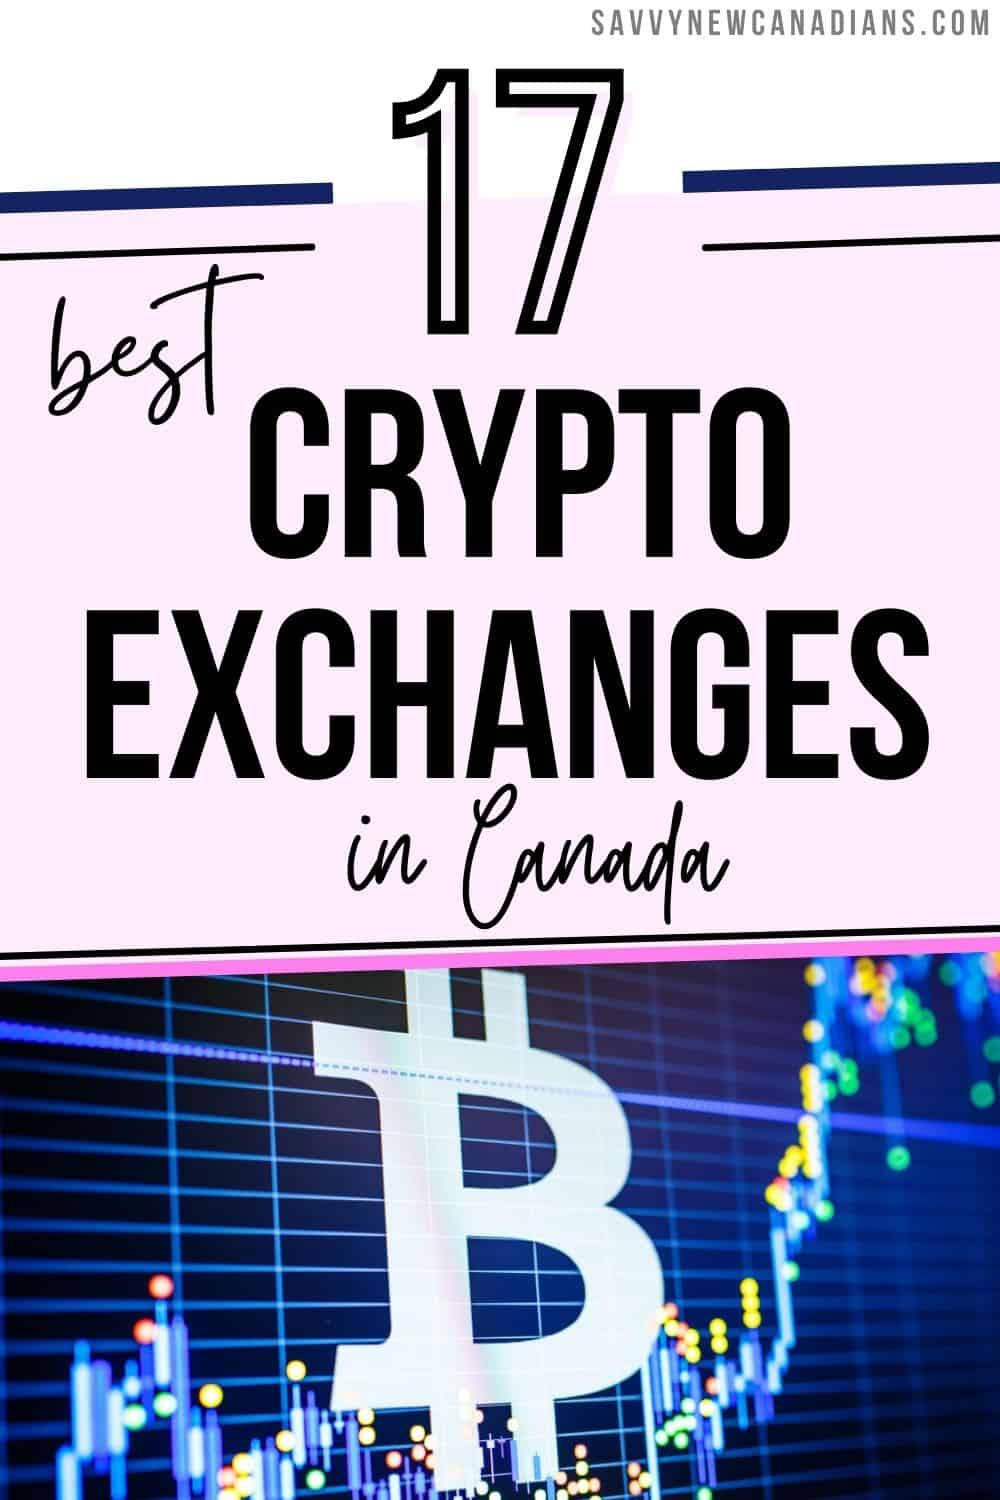 largest crypto exchanges in canada